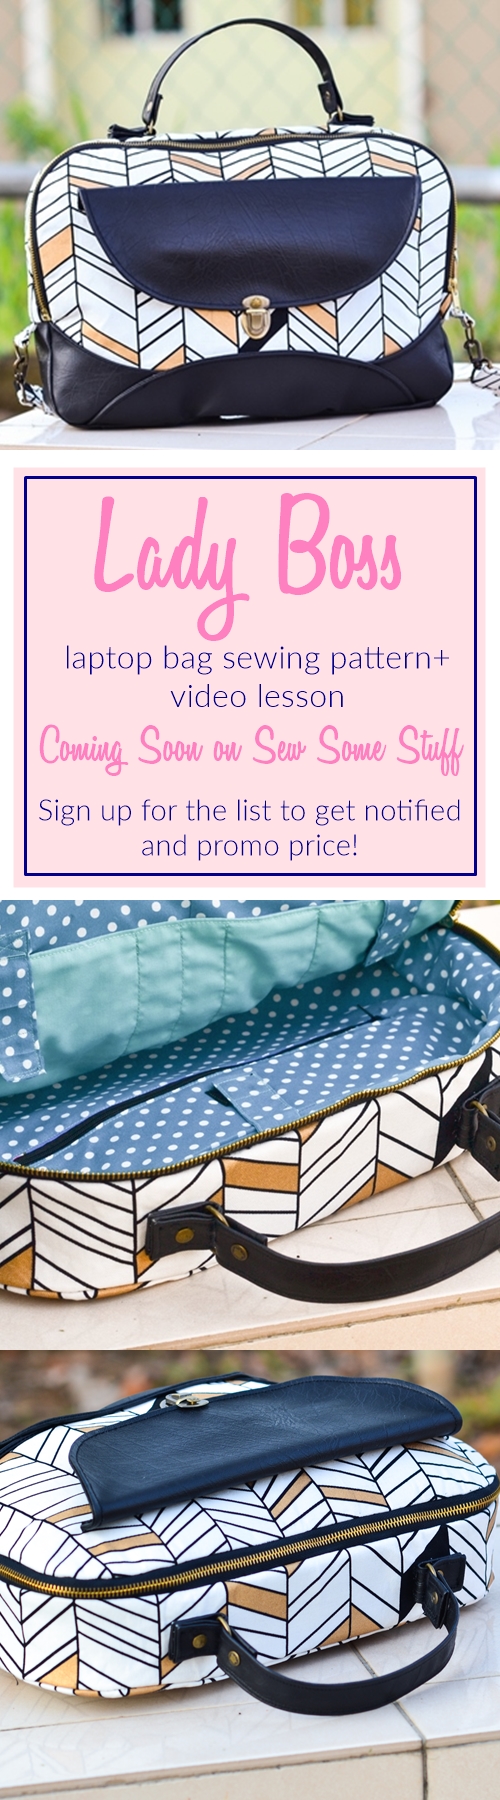 Lady Boss laptop bag sewing pattern and video lesson coming soon only on SEW SOME STUFF. Sign up for the list to get notified and special promo code on launch.